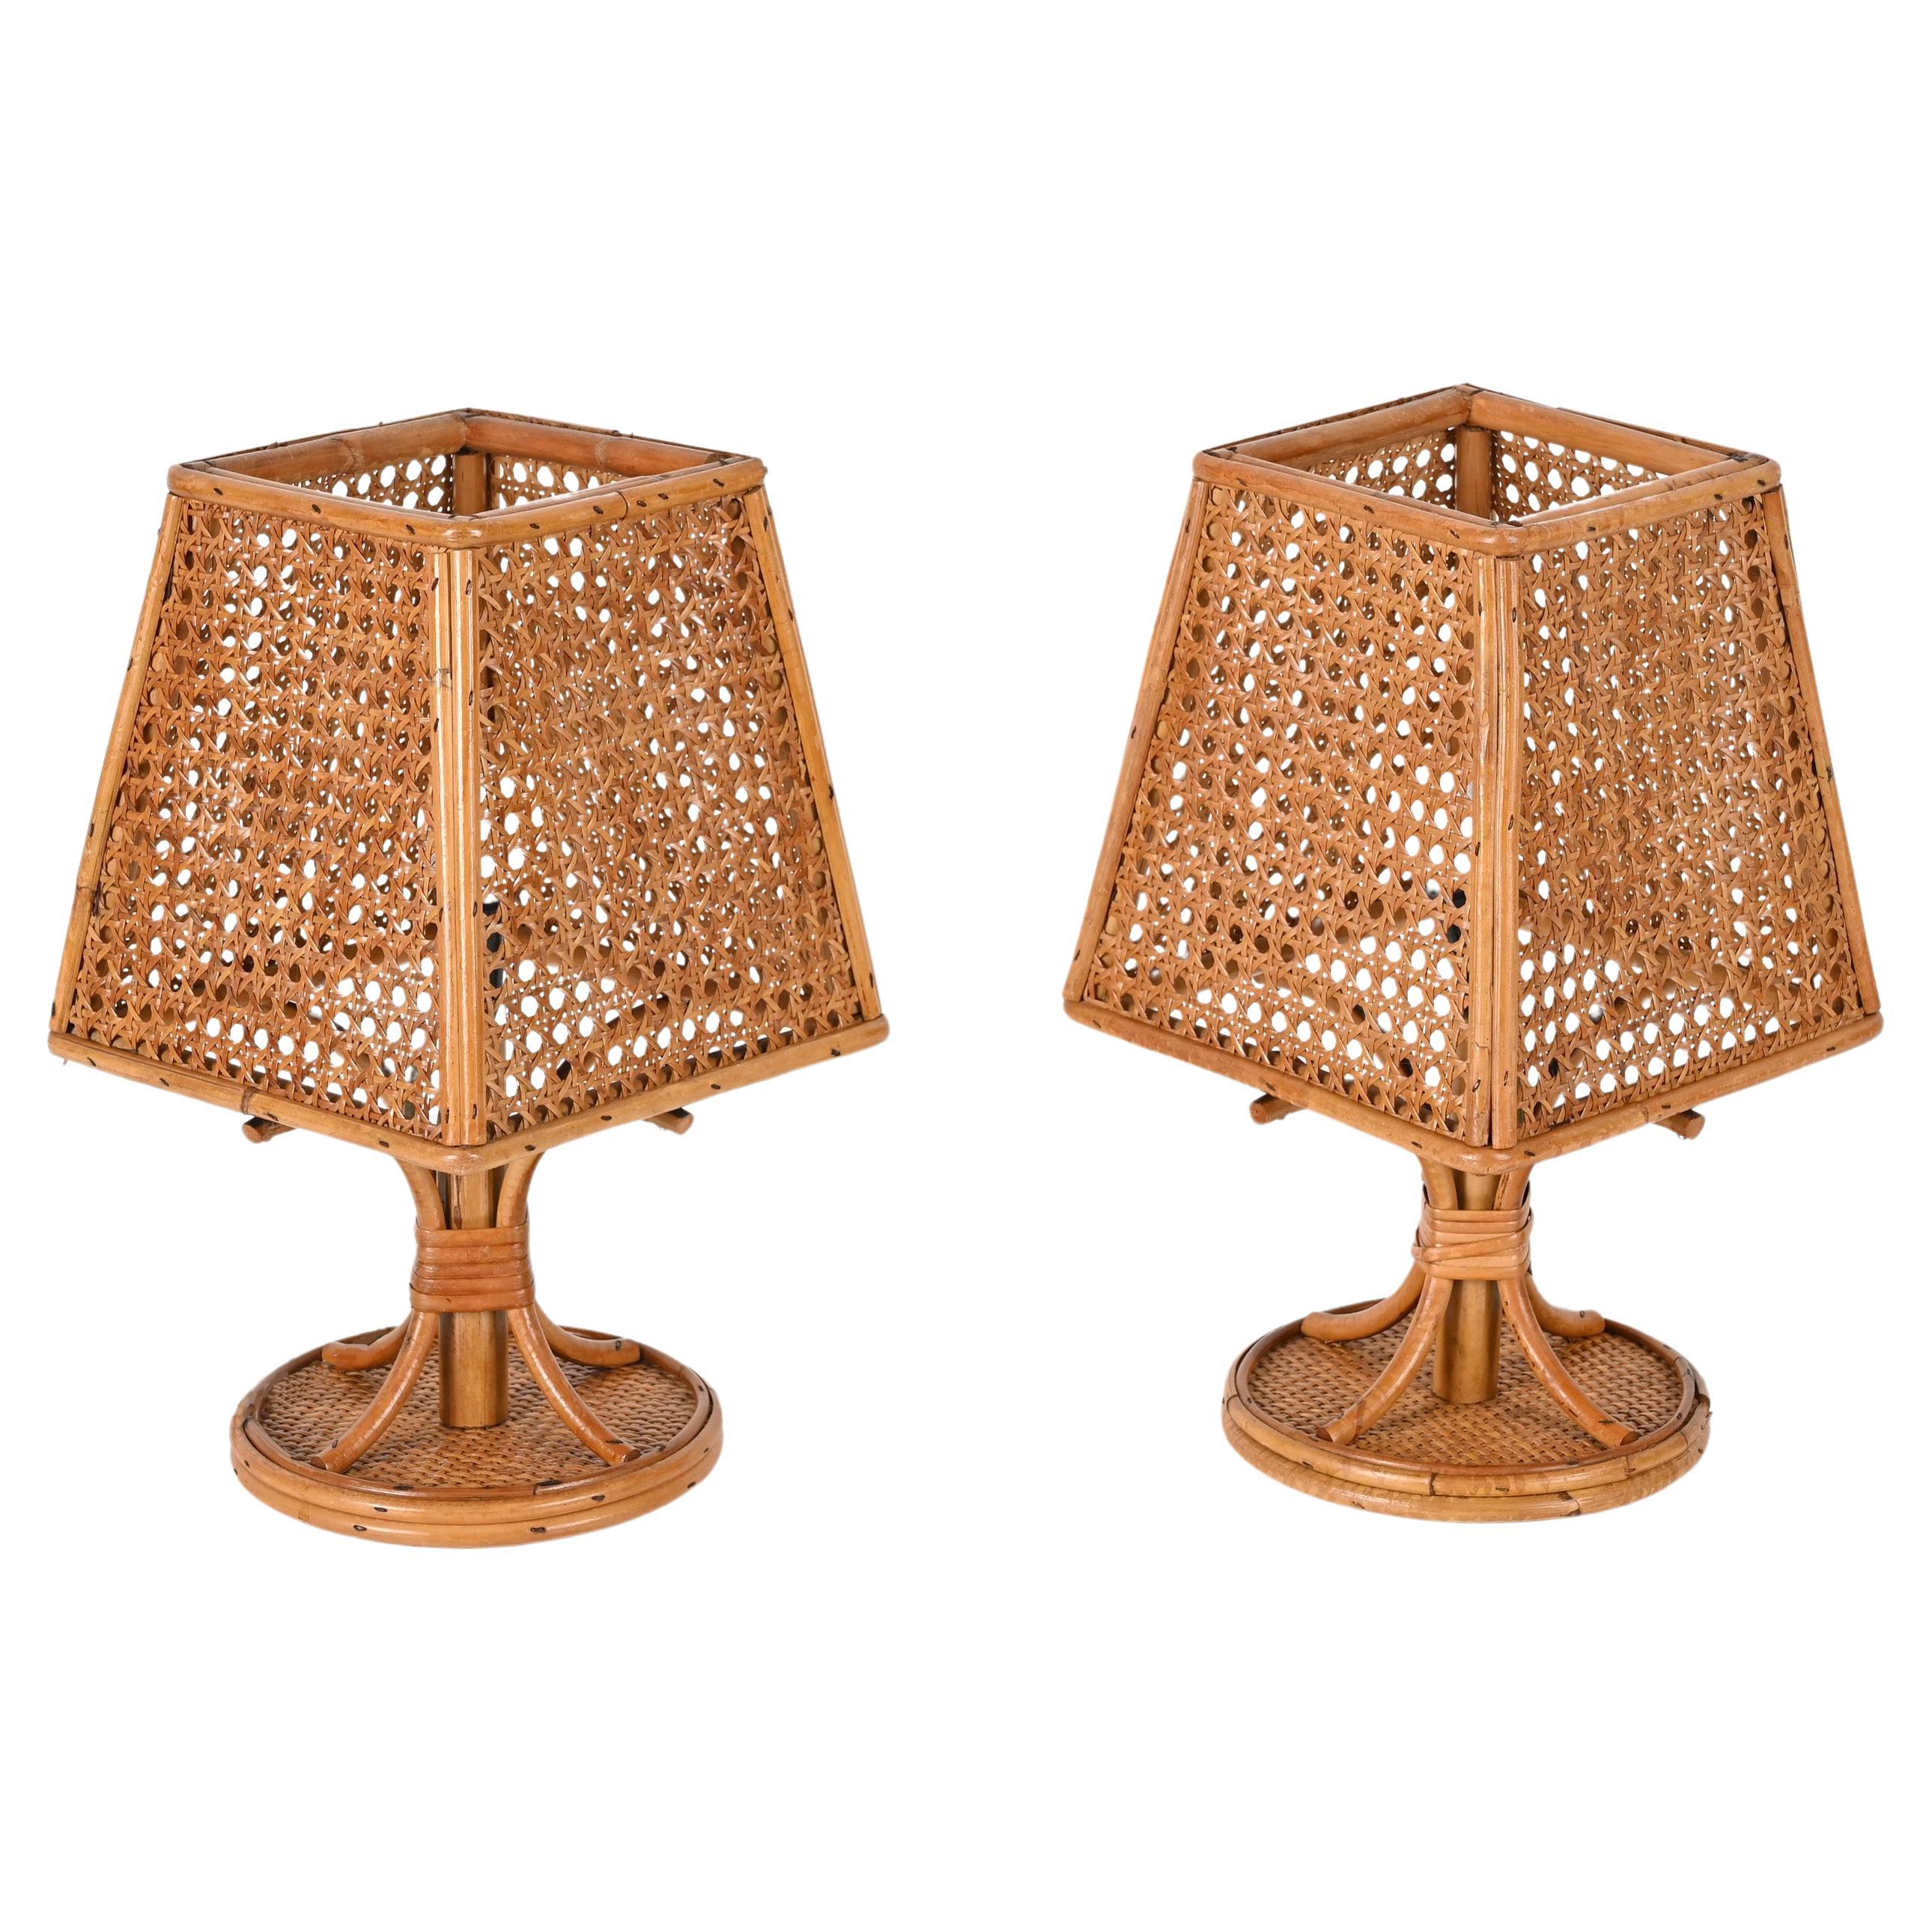 Pair of French Riviera Table Lamps in Wicker and Rattan, Italy 1960s For Sale